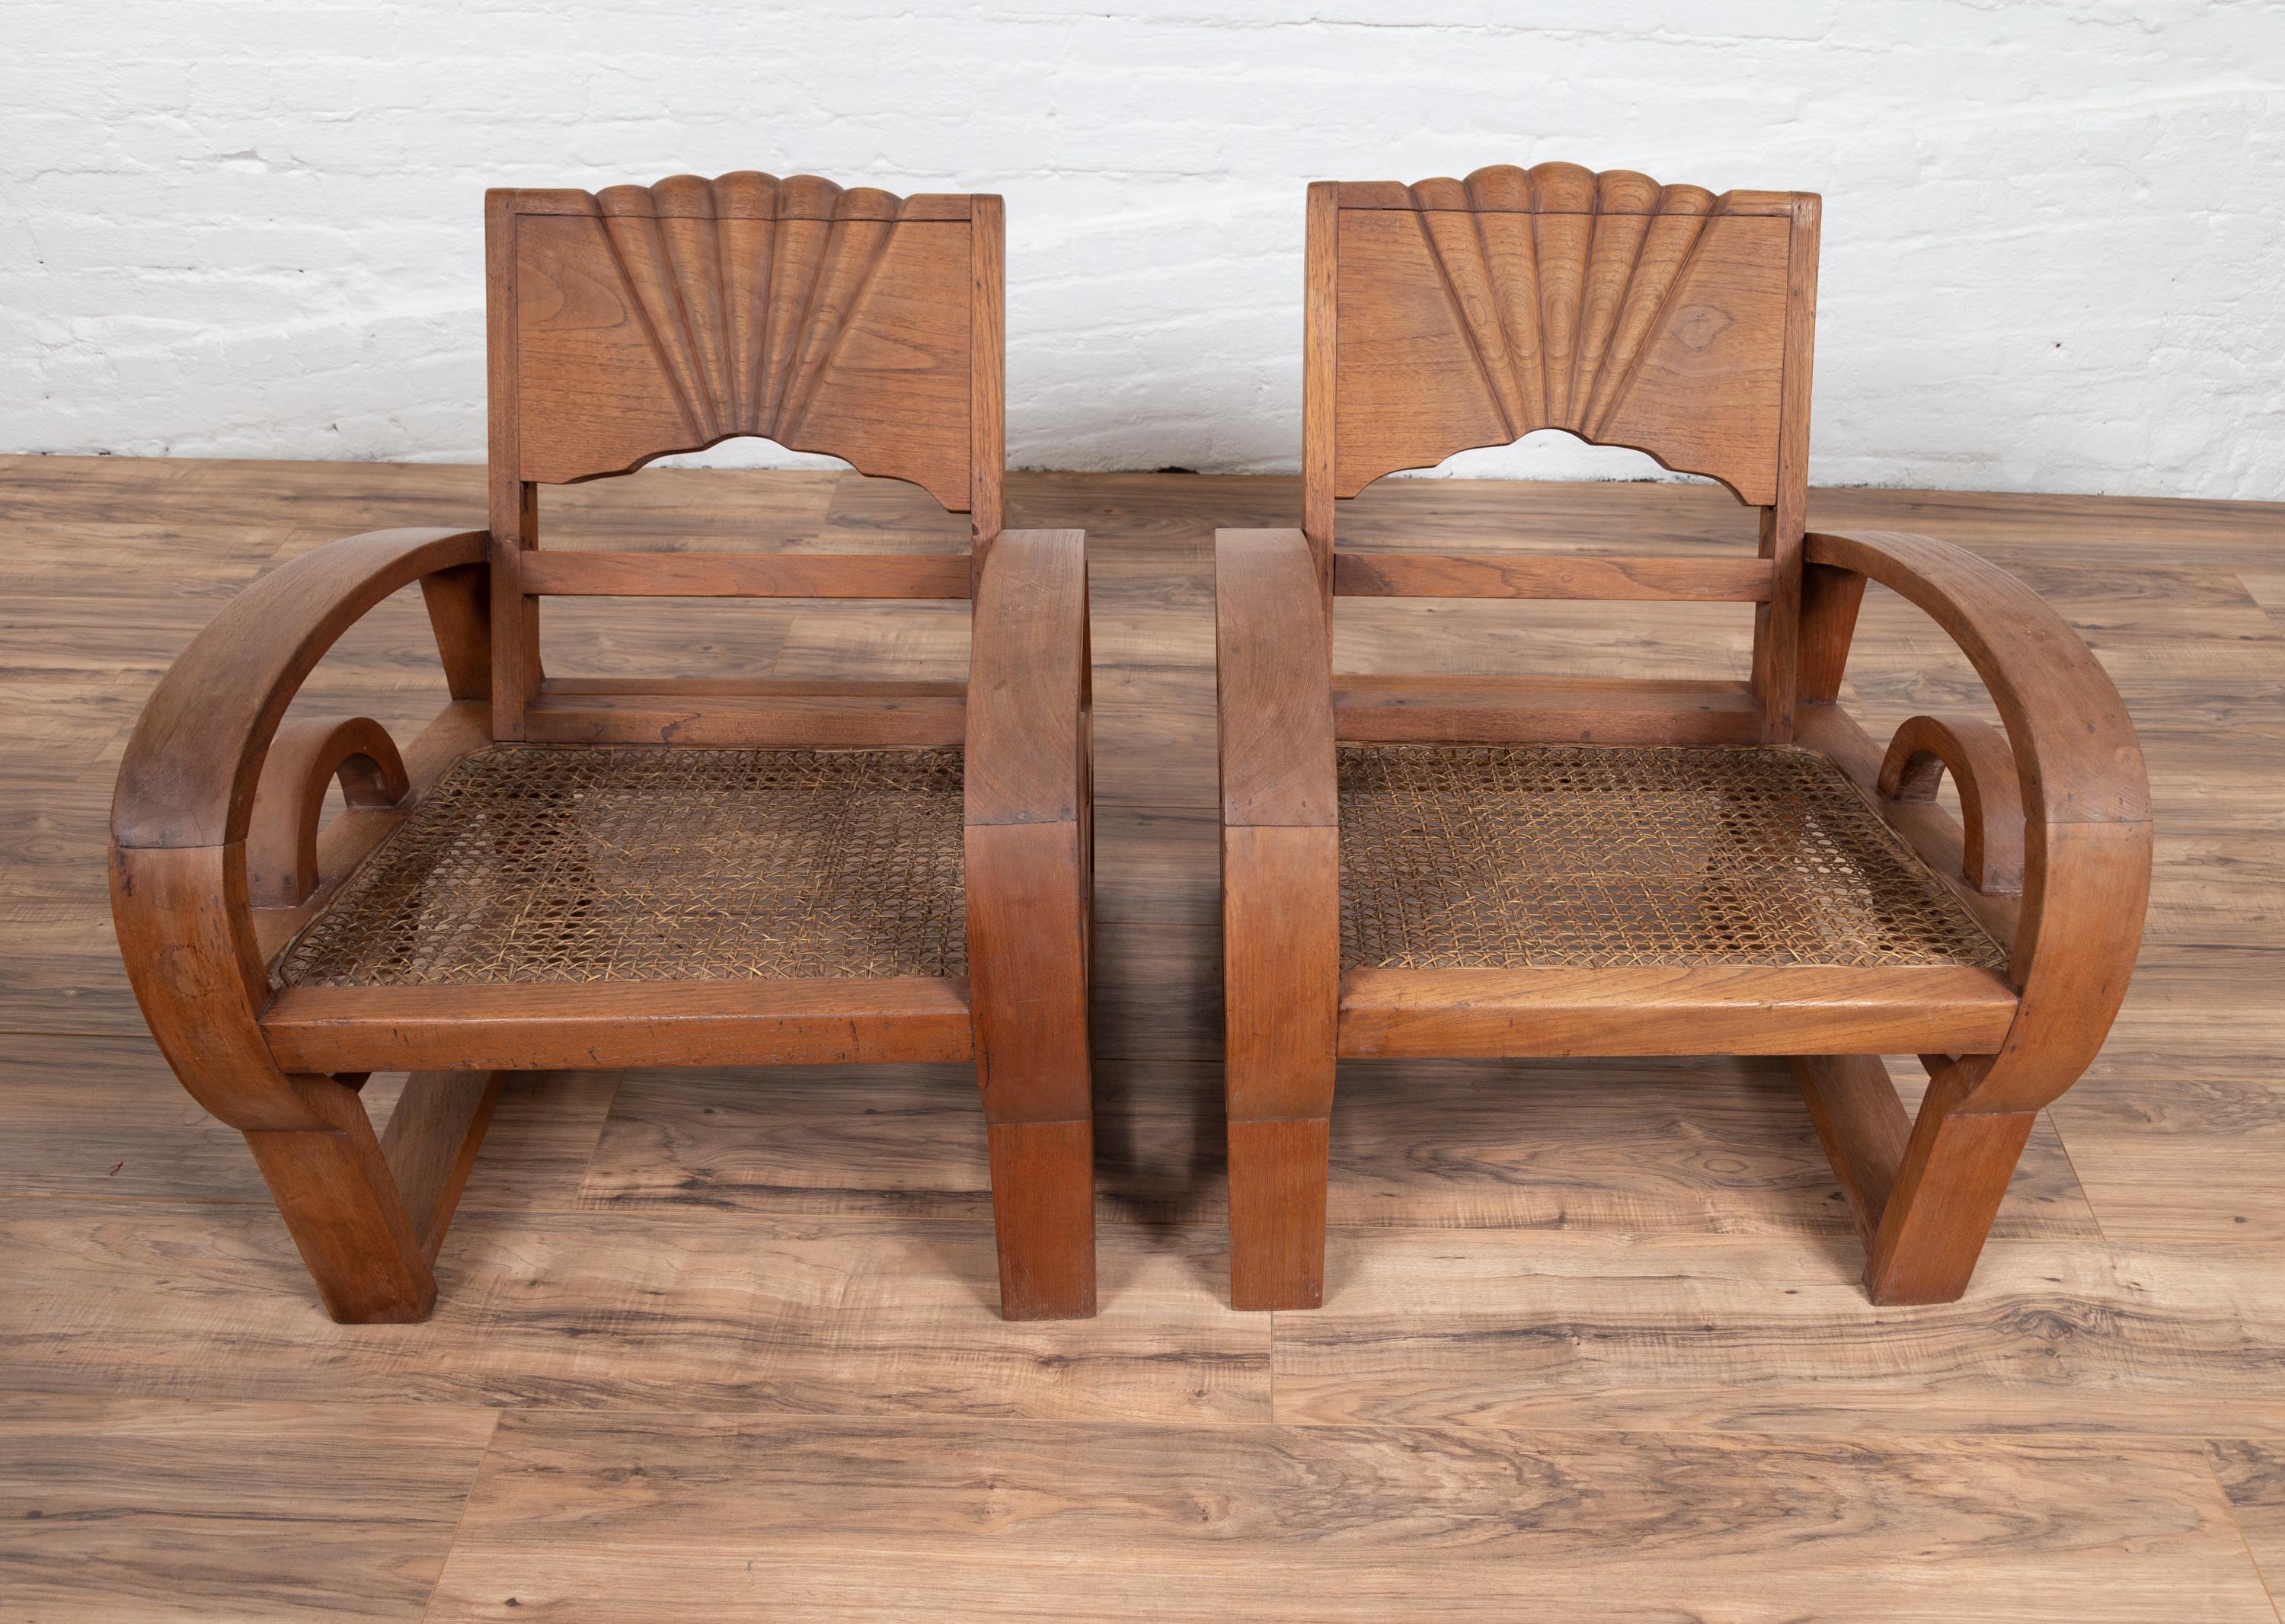 Pair of Teak Wood Country Chairs from Madura with Rattan Seats and Looping Arms 9